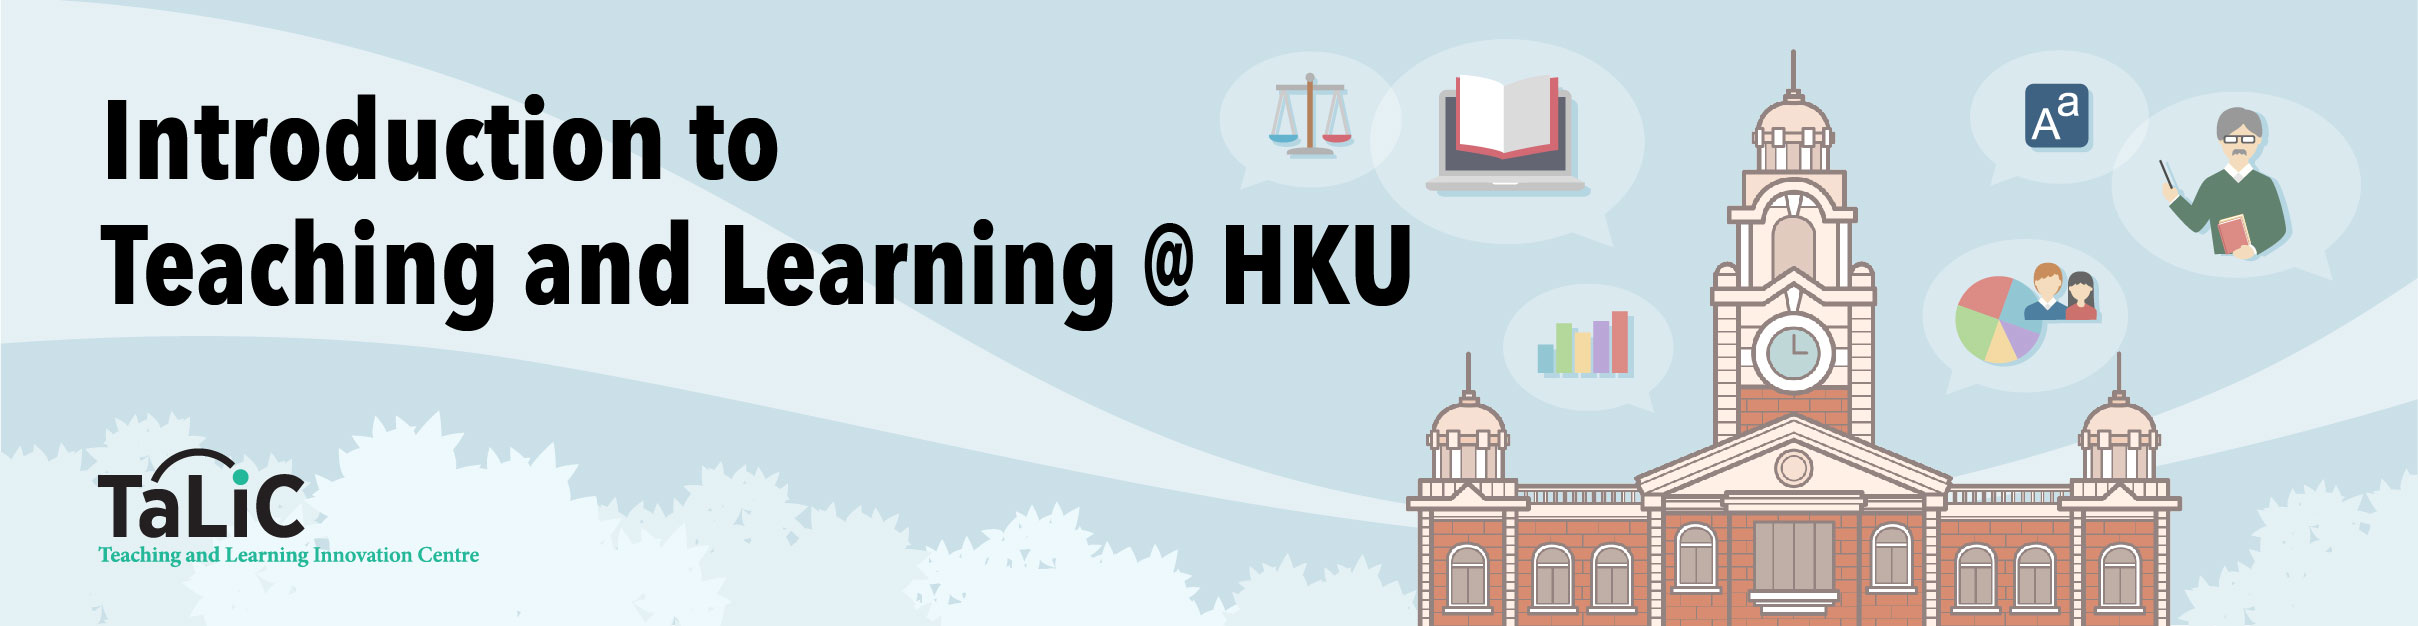 Introduction to Teaching and Learning @ HKU